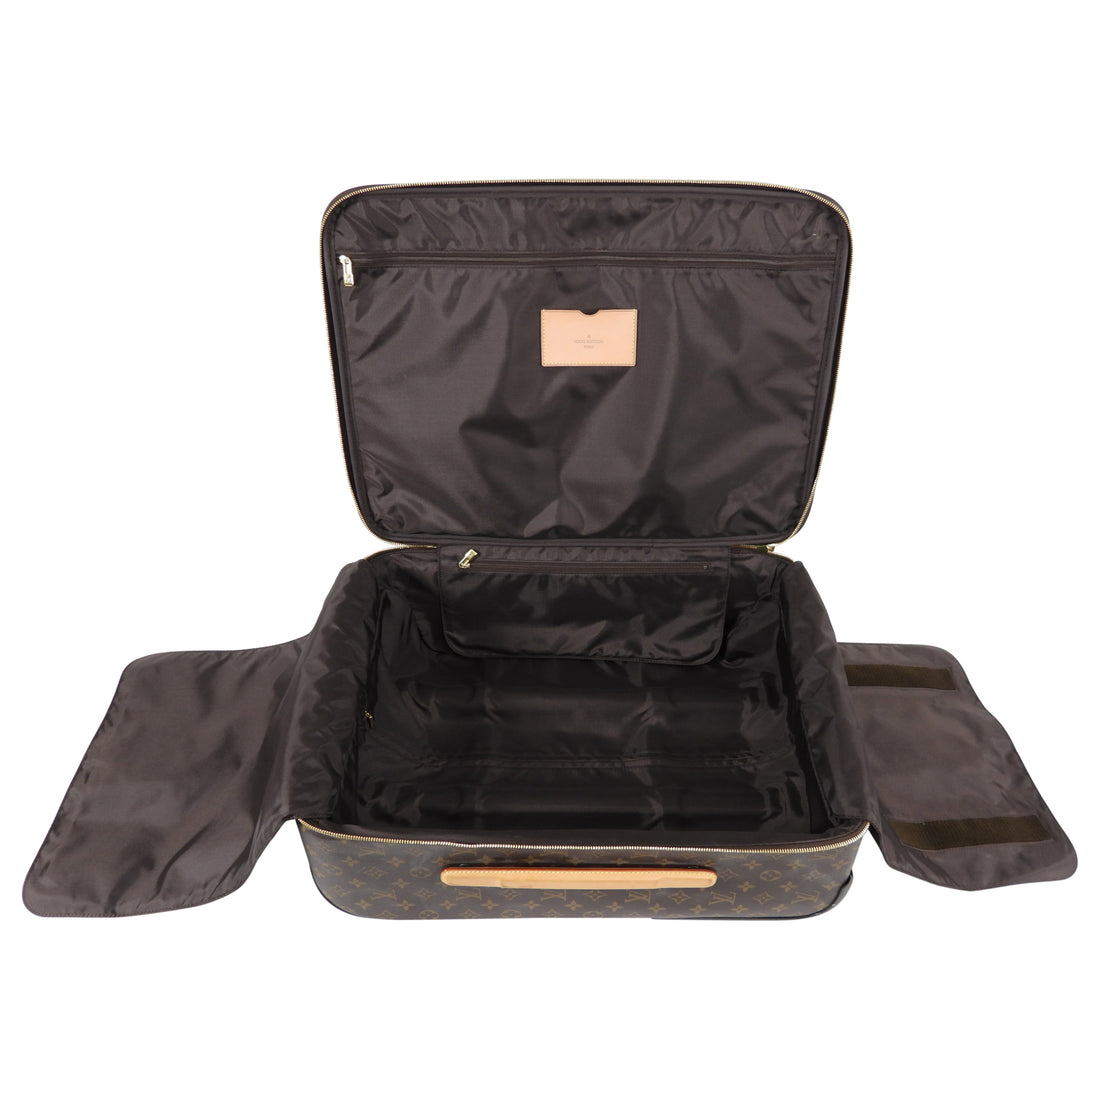 Pegase Business 55 Roller Suitcase (Authentic Pre-Owned) – The Lady Bag